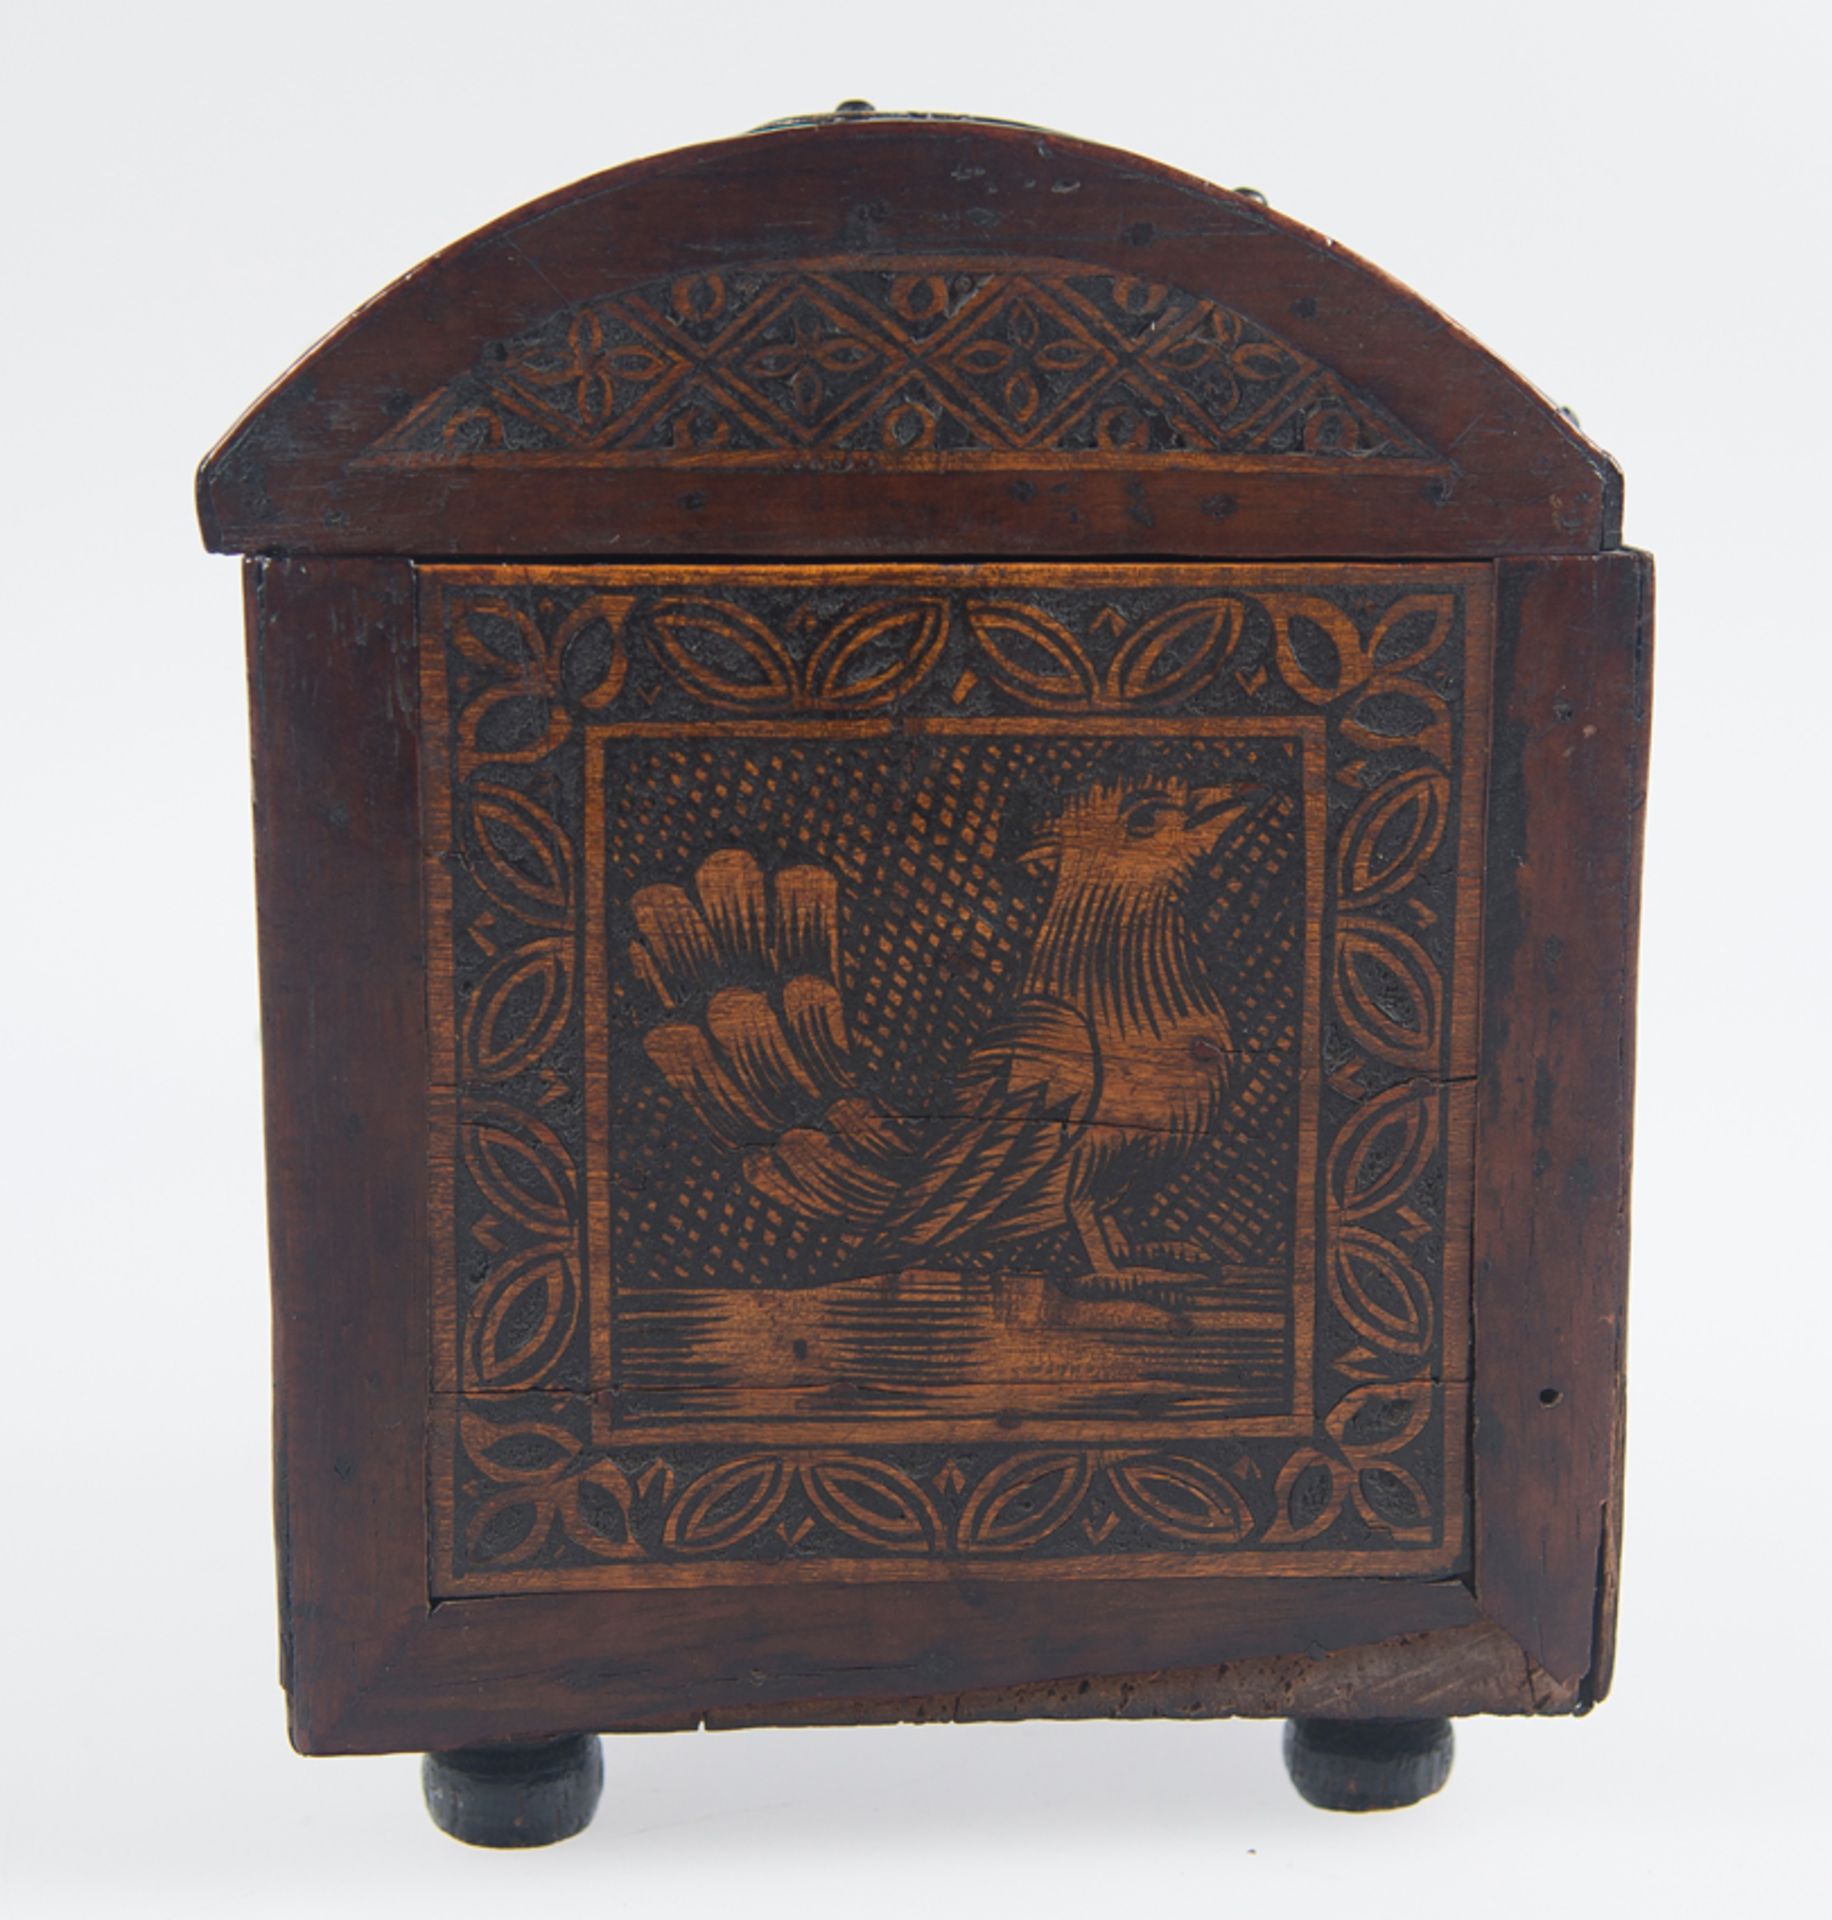 Engraved wooden chest with iron fittings and curved lid. Colonial work. Villa Alta de San Ildefonso, - Image 10 of 11